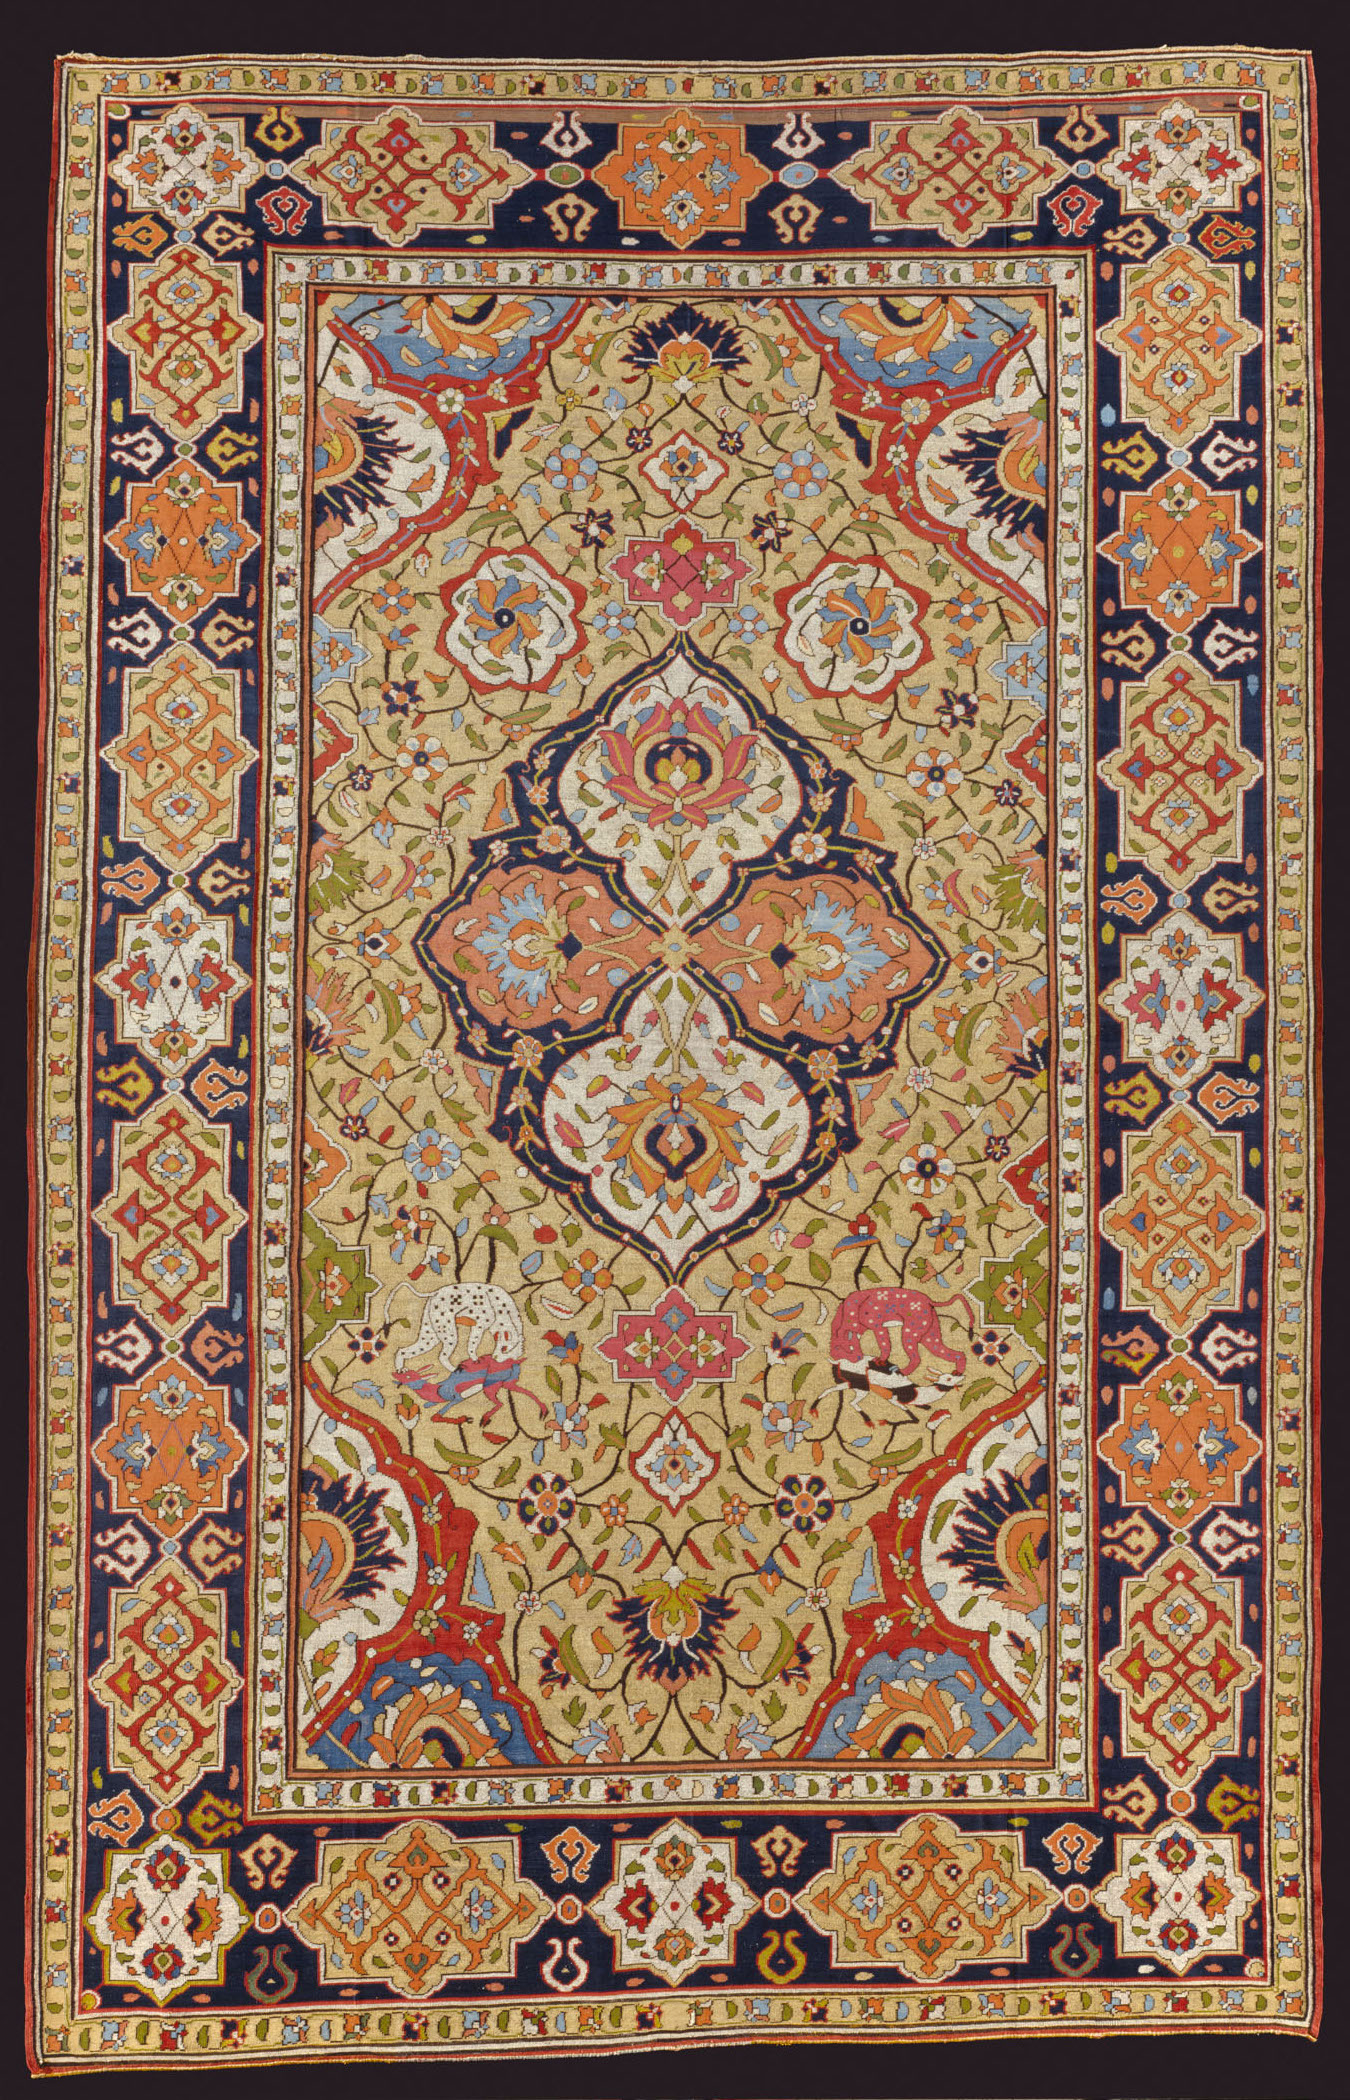 A rectangular multi-colored rug with an intricate medallion design.